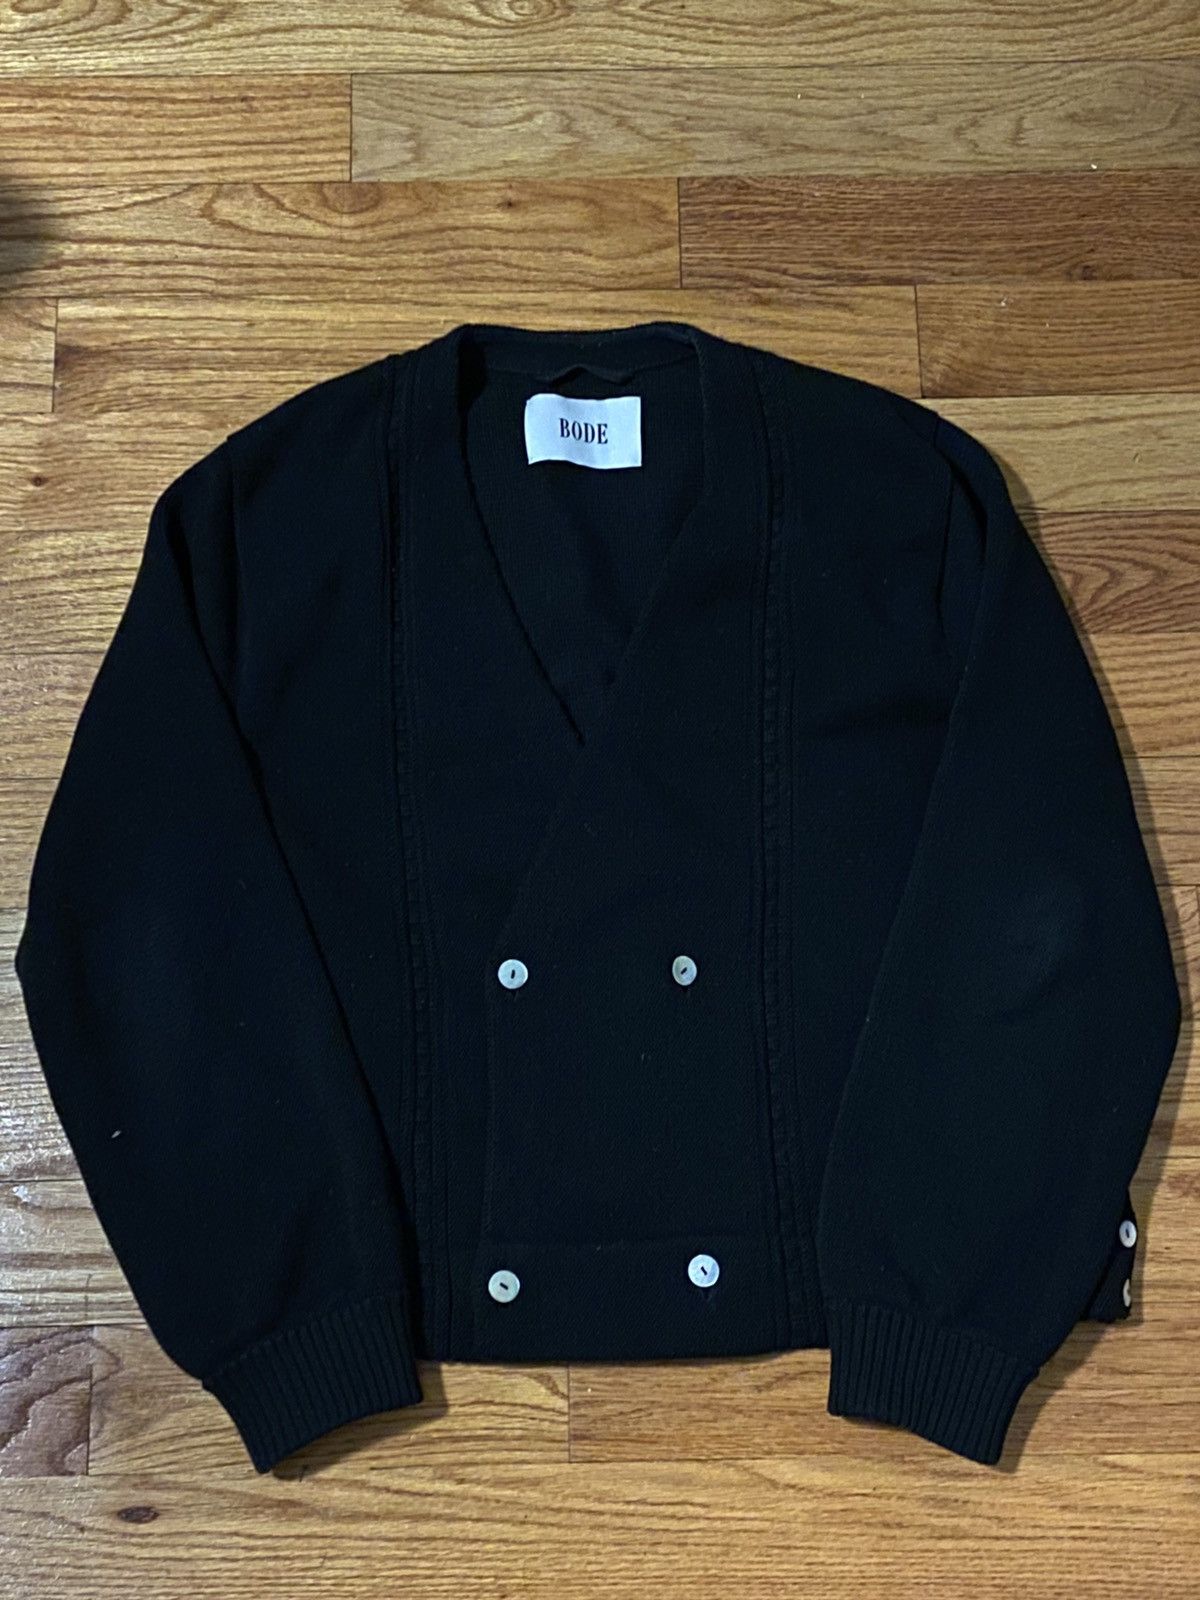 Bode Bode Double Breasted Cotton Cardigan Black | Grailed